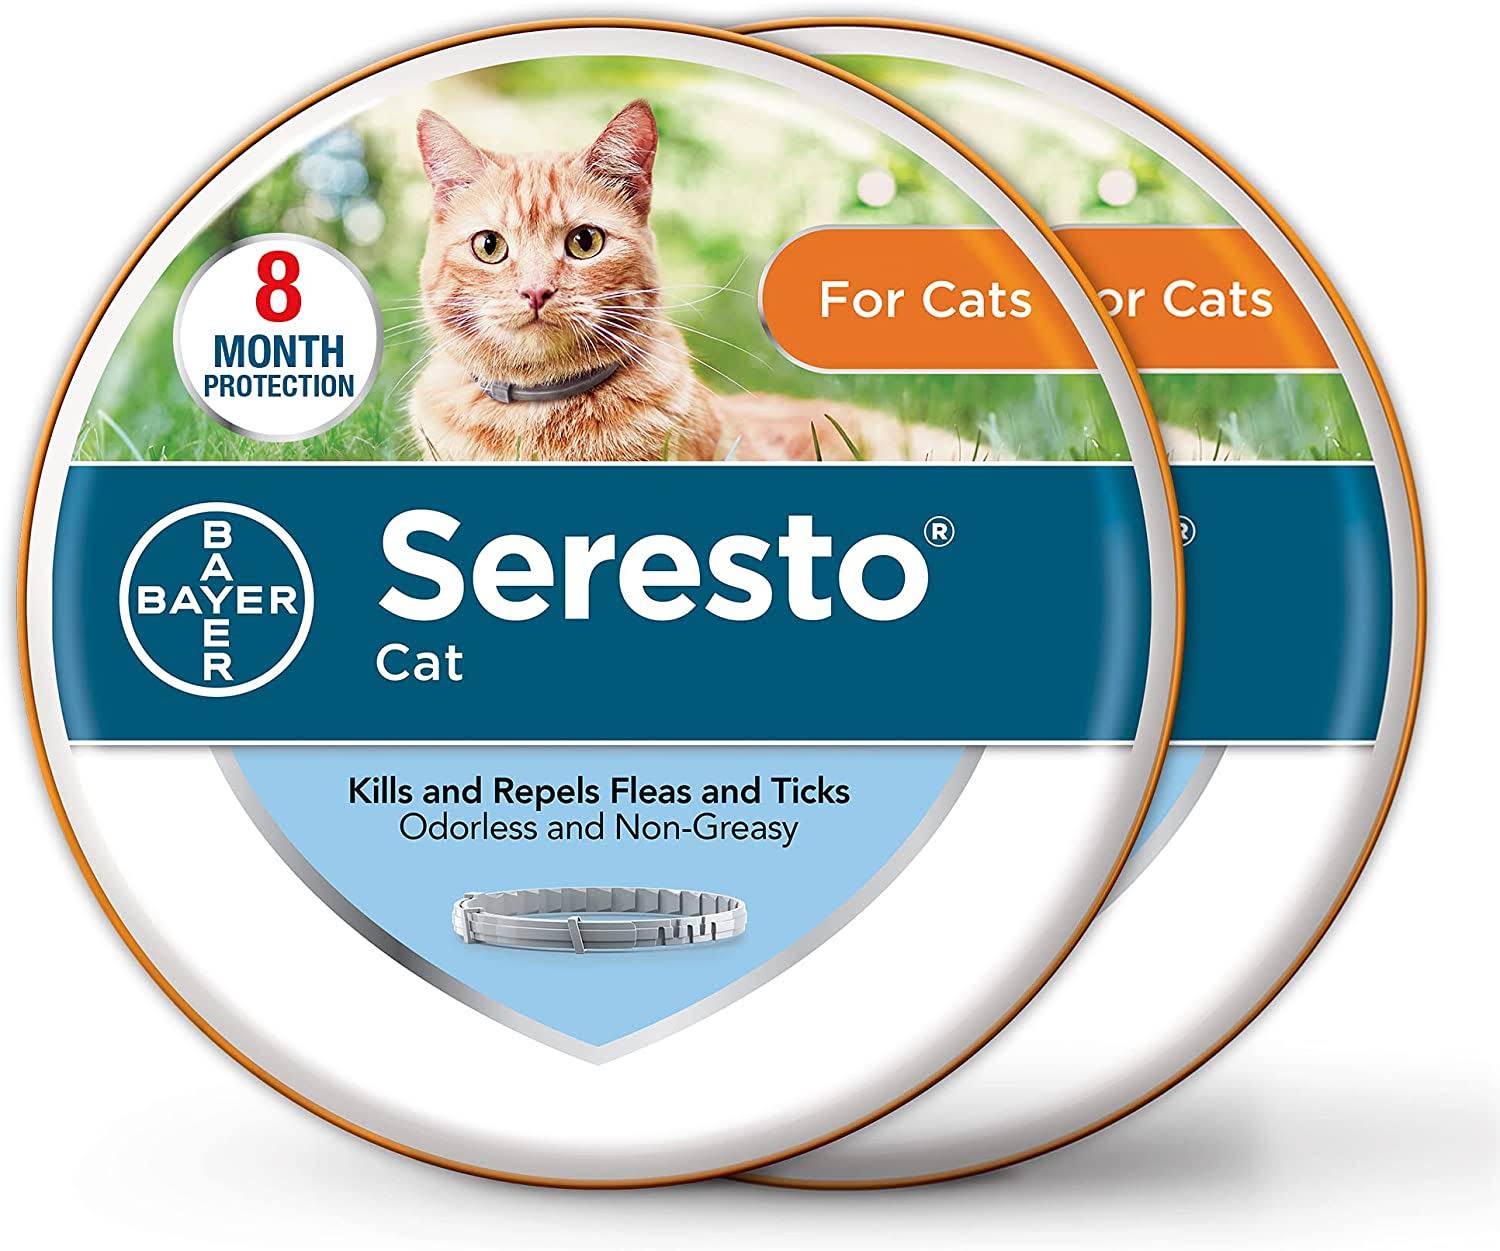 Seresto Cat Vet-Recommended Flea & Tick Treatment & Prevention Collar For Cats, 8 Months Protection